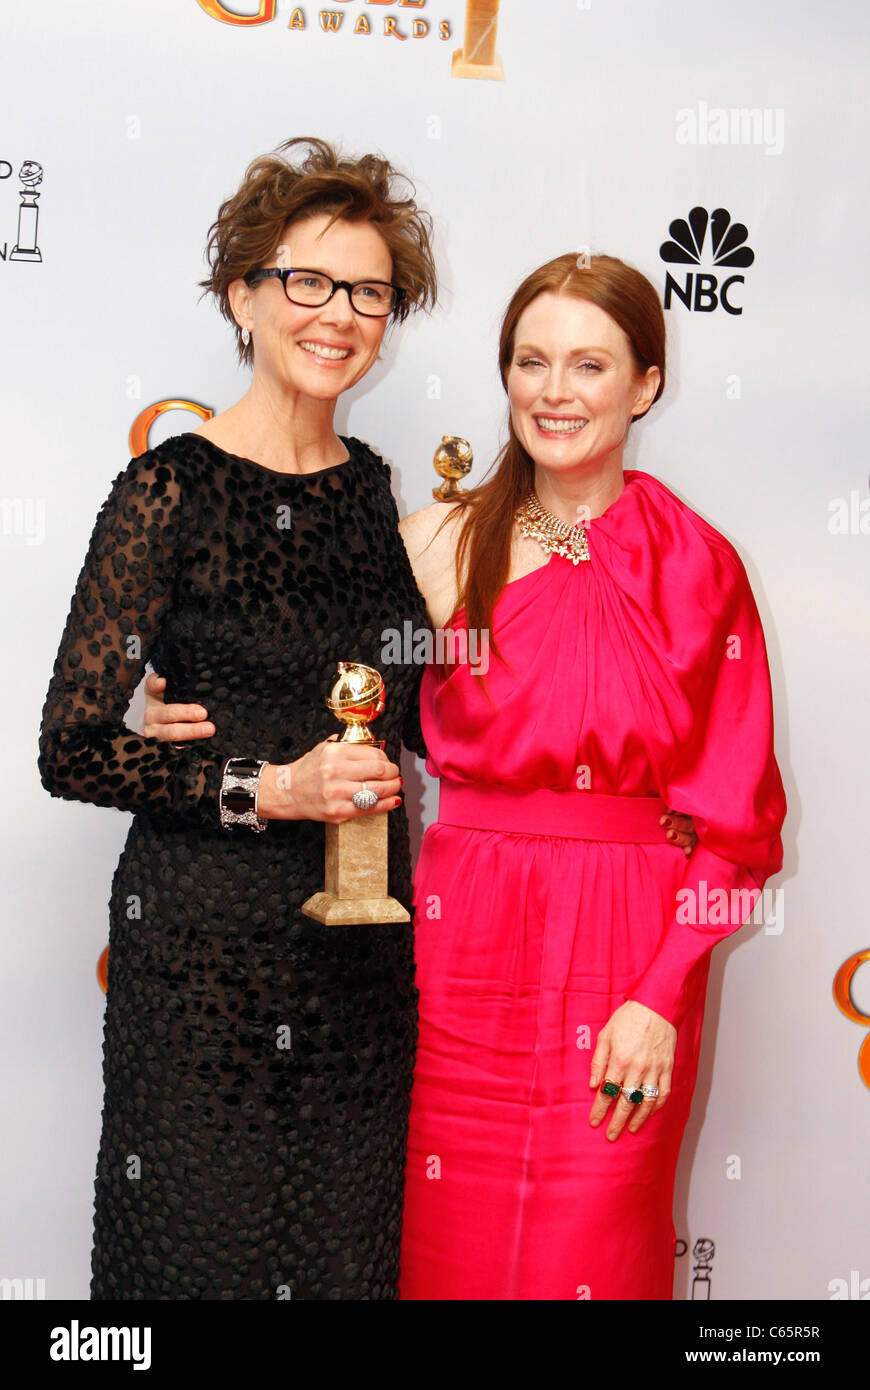 Annette Bening (wearing Tom Ford), Julianne Moore (wearing Lanvin) in the press room for The Hollywood Foreign Press Association 68th Annual Golden Globes Awards - PRESS ROOM, Beverly Hilton Hotel, Los Angeles, CA January 16, 2011. Photo By: Jef Hernandez/Everett Collection Stock Photo